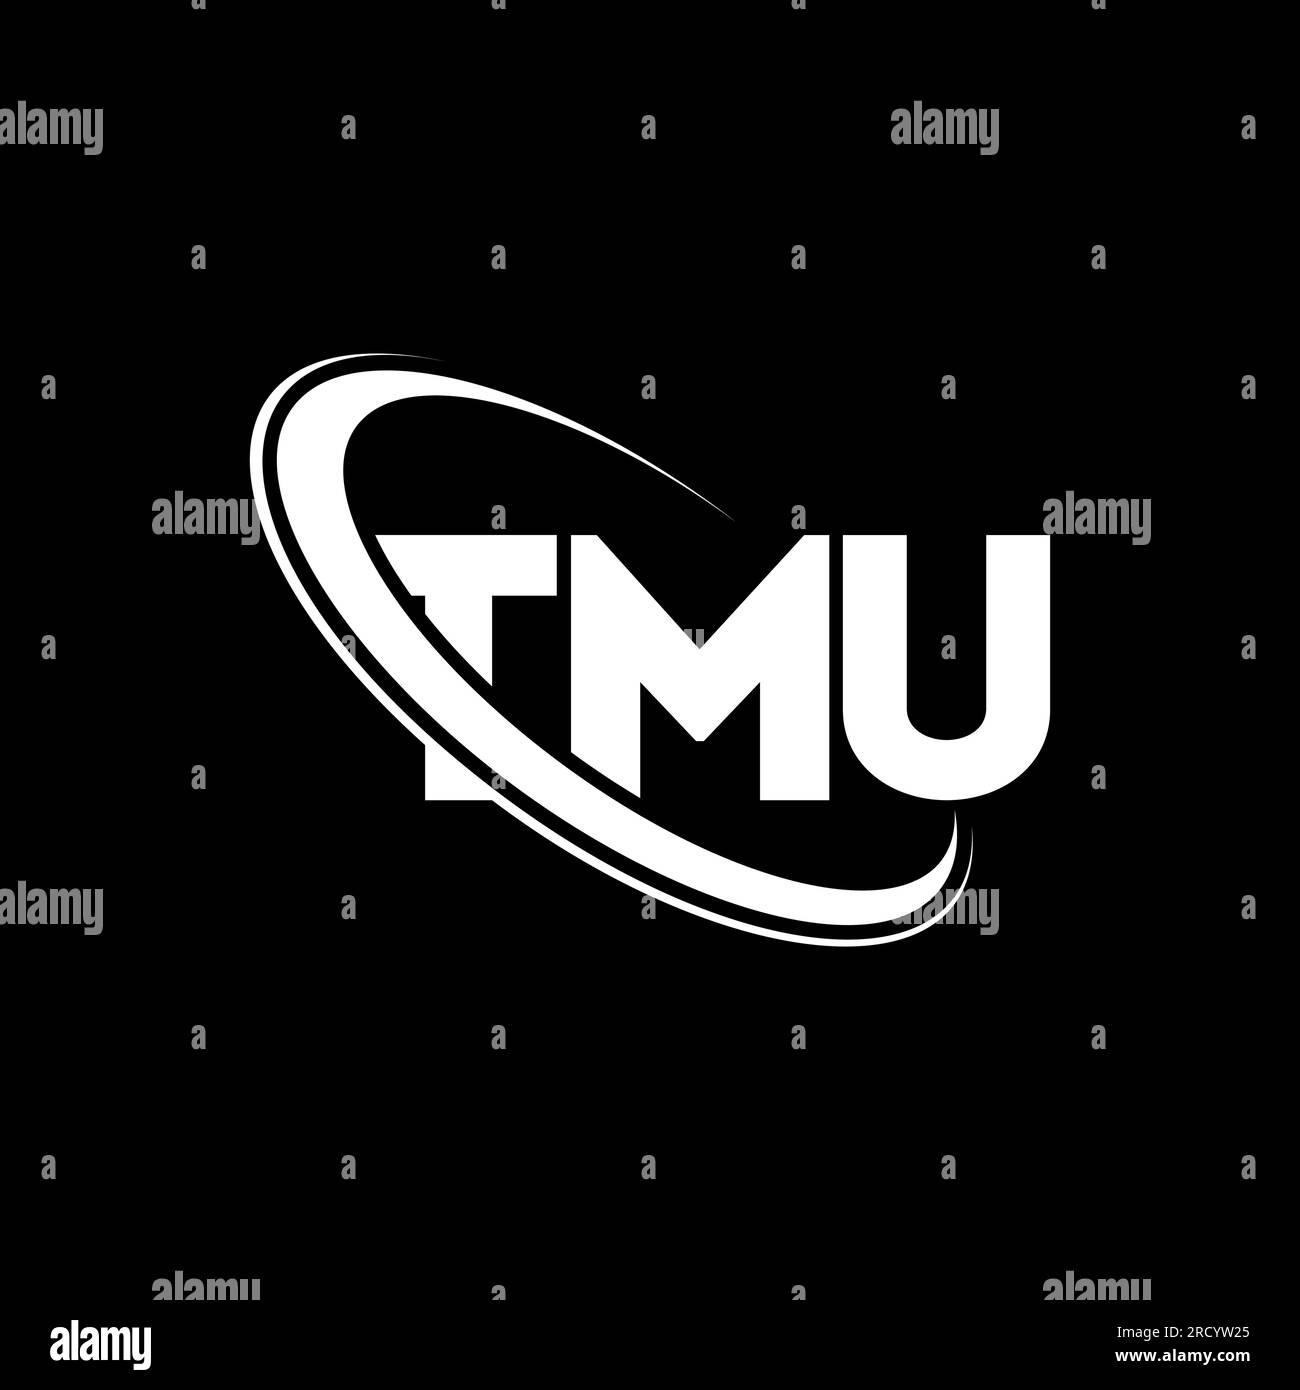 Tmu business logo hires stock photography and images Alamy